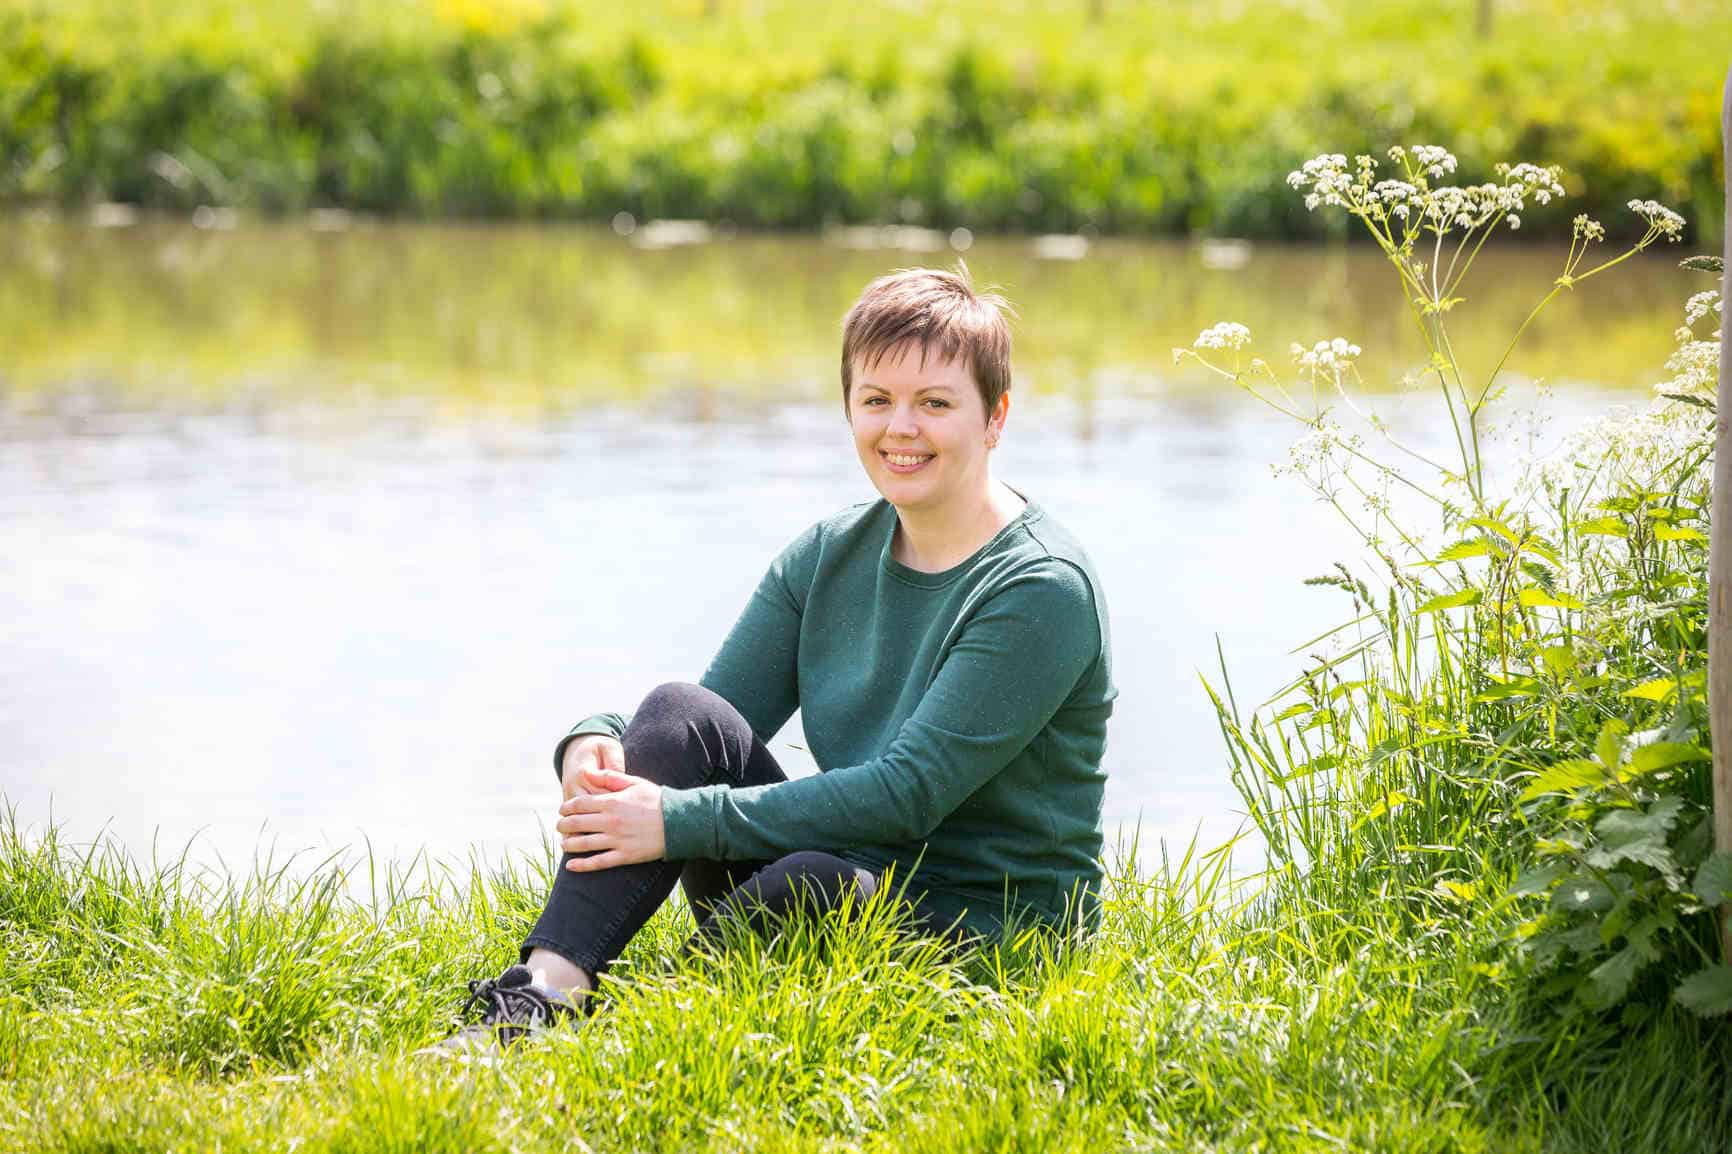 Fiona is sitting on the bright green grass in front of the River Avon. Behind her you can see the opposite riverbank. Fiona has one leg tucked into her chest which she is holding with her hands in a relaxed pose. She is smiling, wearing a green sweater, black skinny jeans and black trainers.